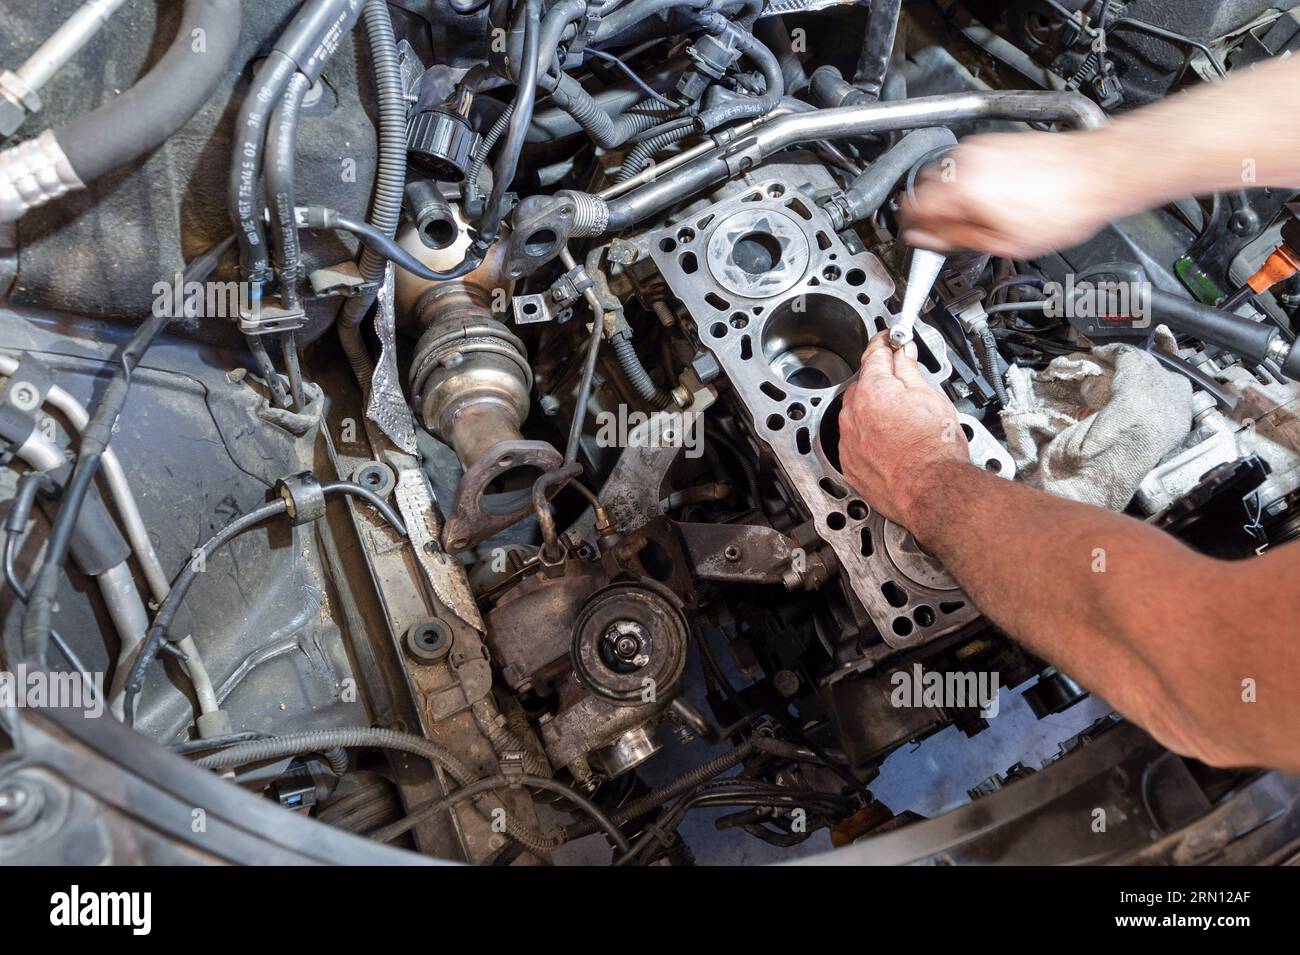 Mechanic working on an engine in a garage Stock Photo